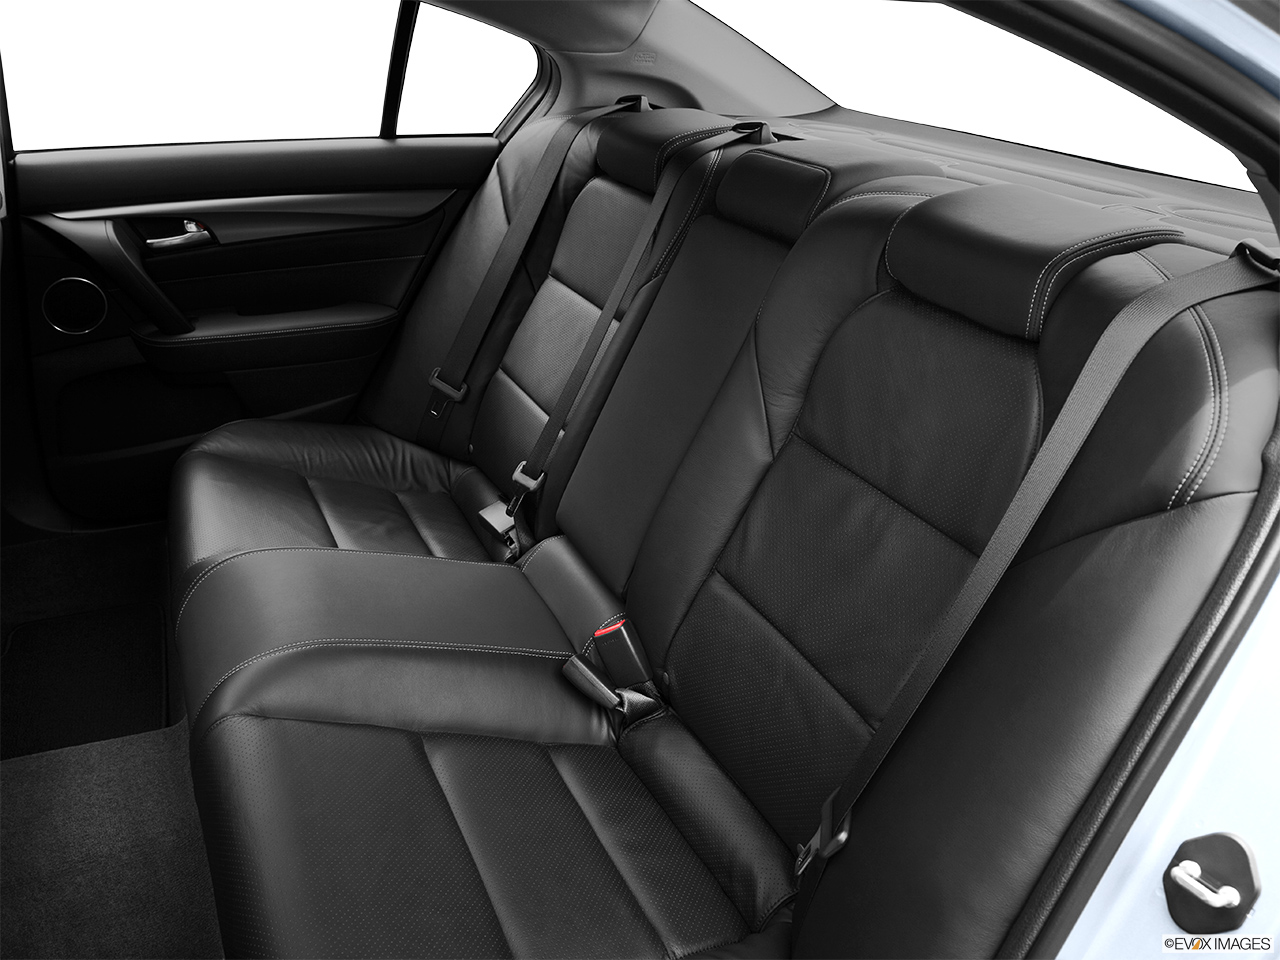 2013 Acura TL SH-AWD Rear seats from Drivers Side. 